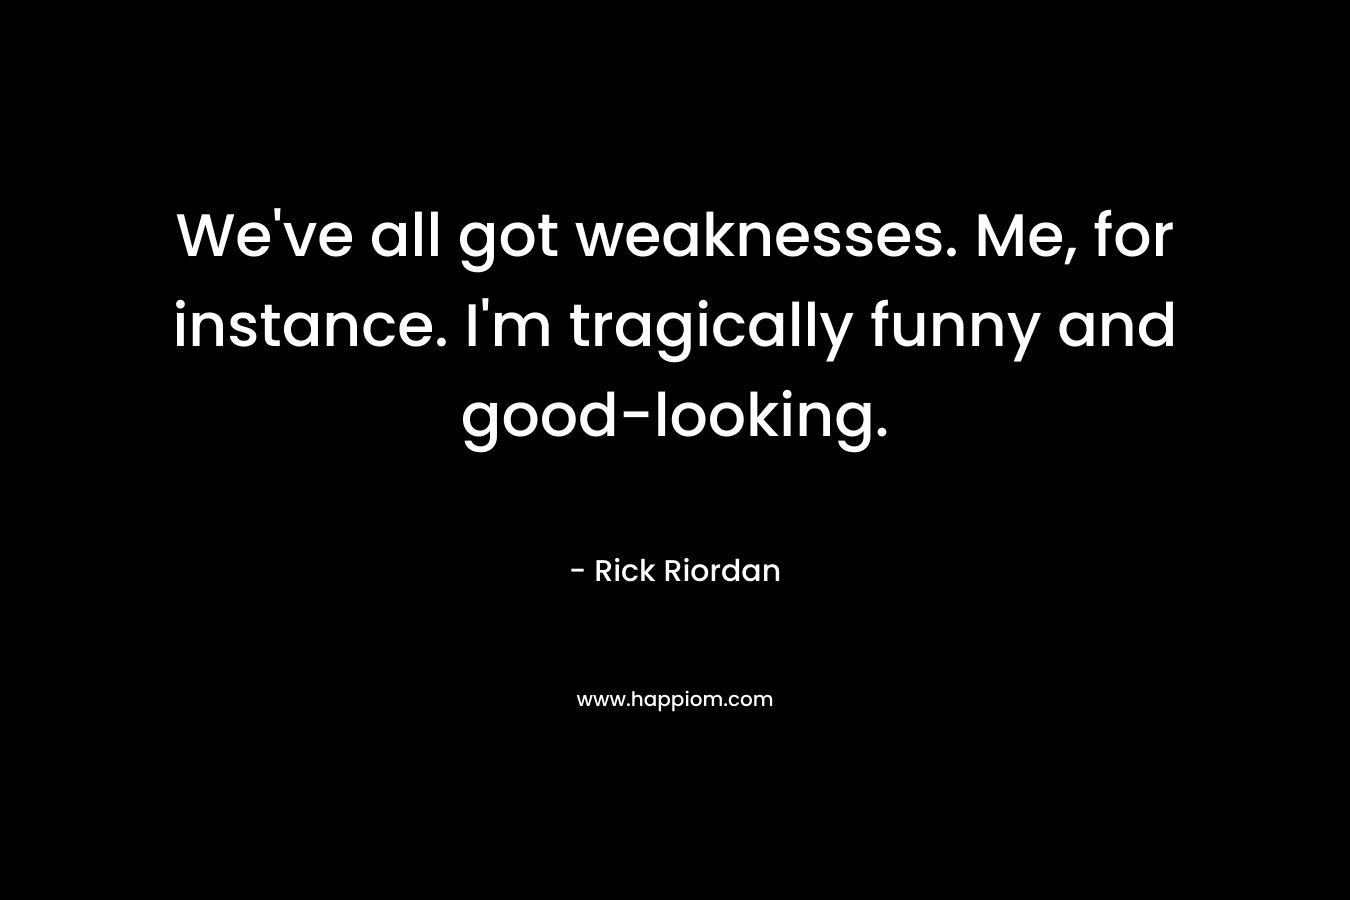 We've all got weaknesses. Me, for instance. I'm tragically funny and good-looking.